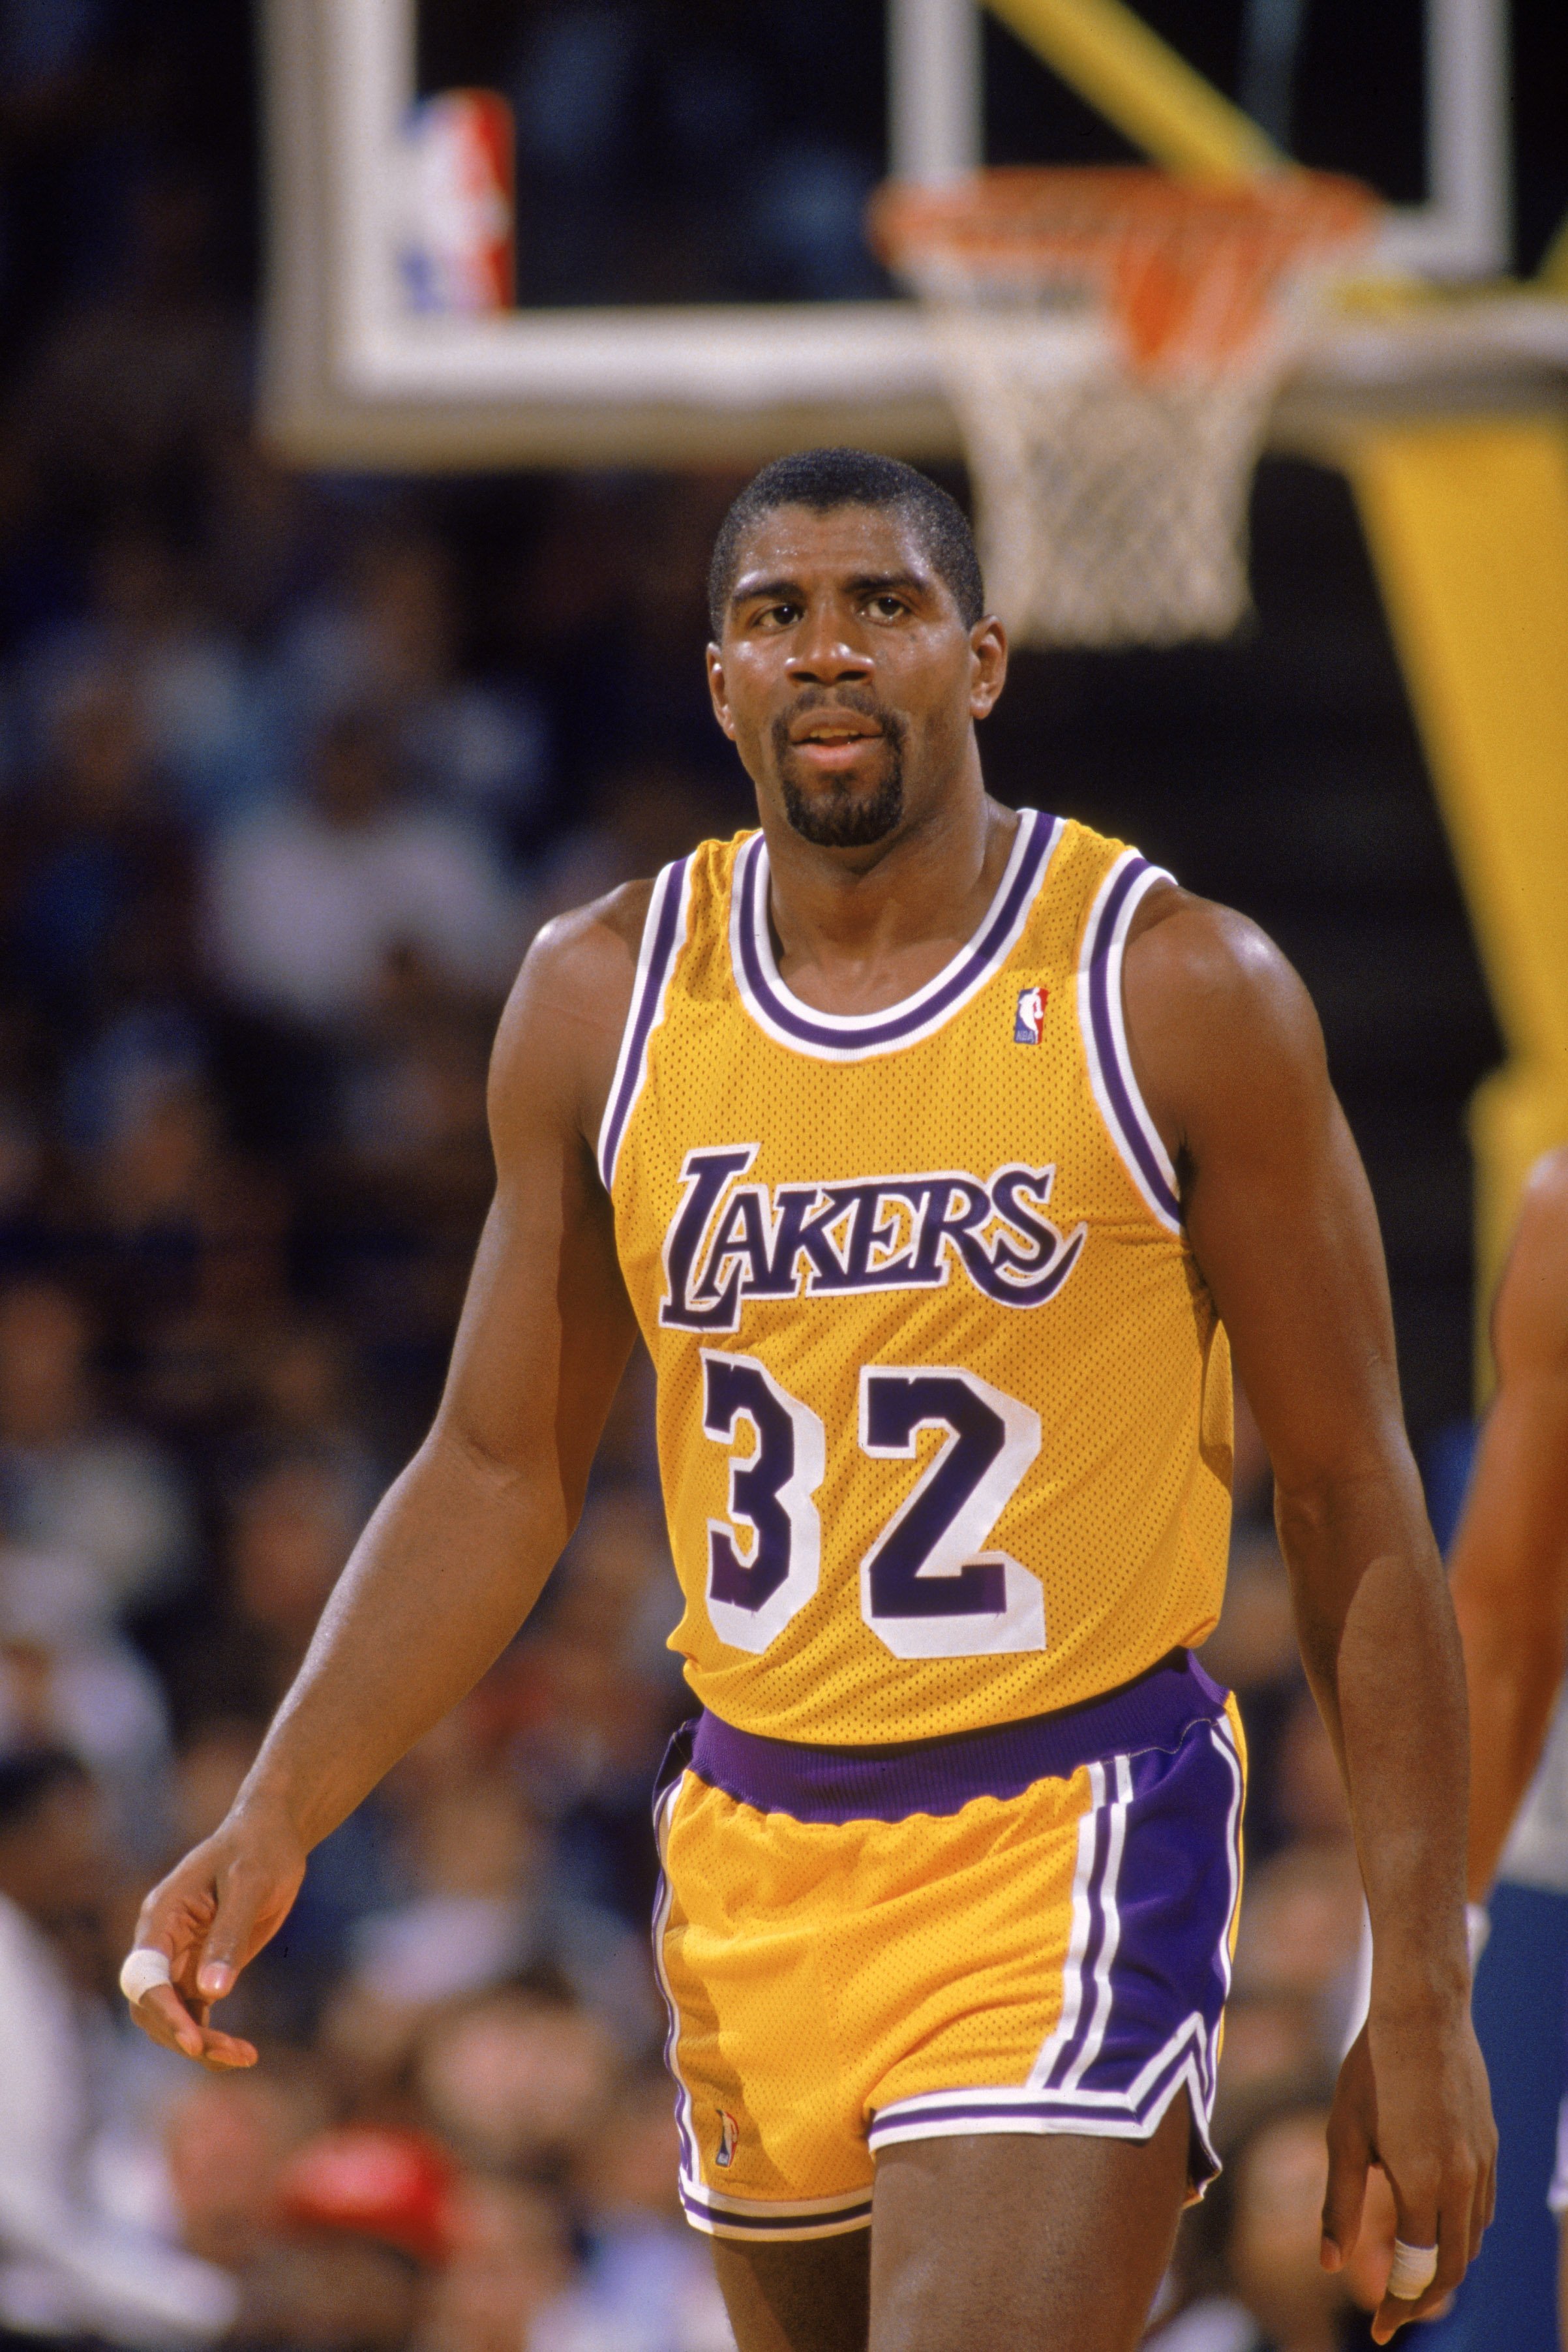 Magic Johnson #32 of the Los Angeles Lakers walks down the court during an NBA game at the Great Western Forum in Los Angeles, California in 1988 | Photo: Getty Images